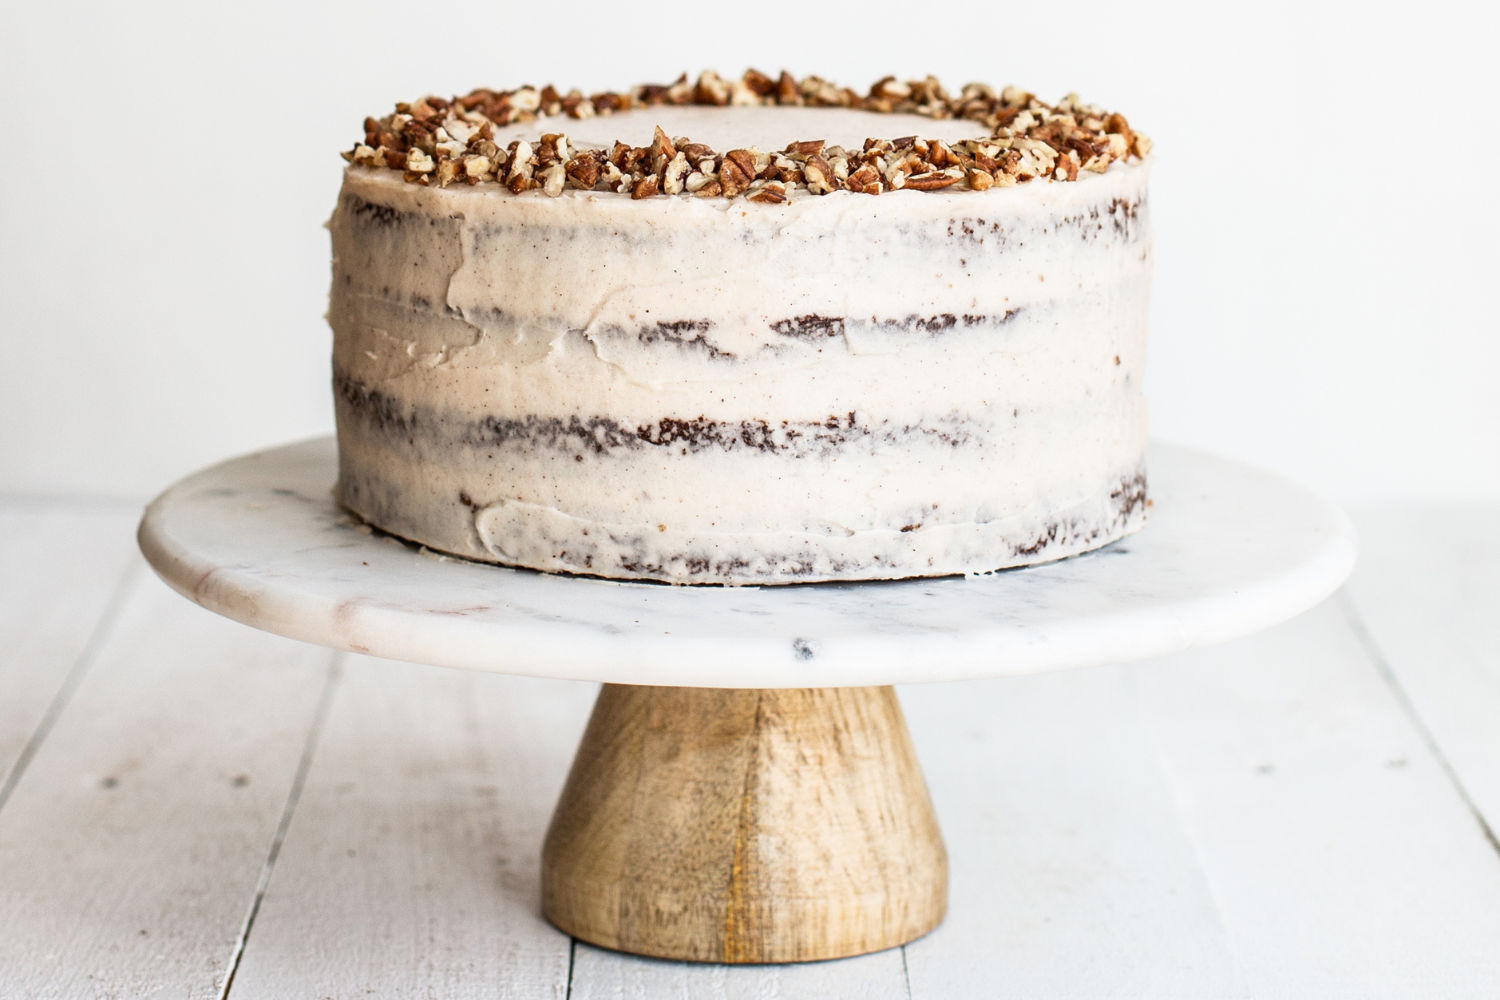 the whole frosted brown butter carrot cake, on a cake stand against a plain white background.